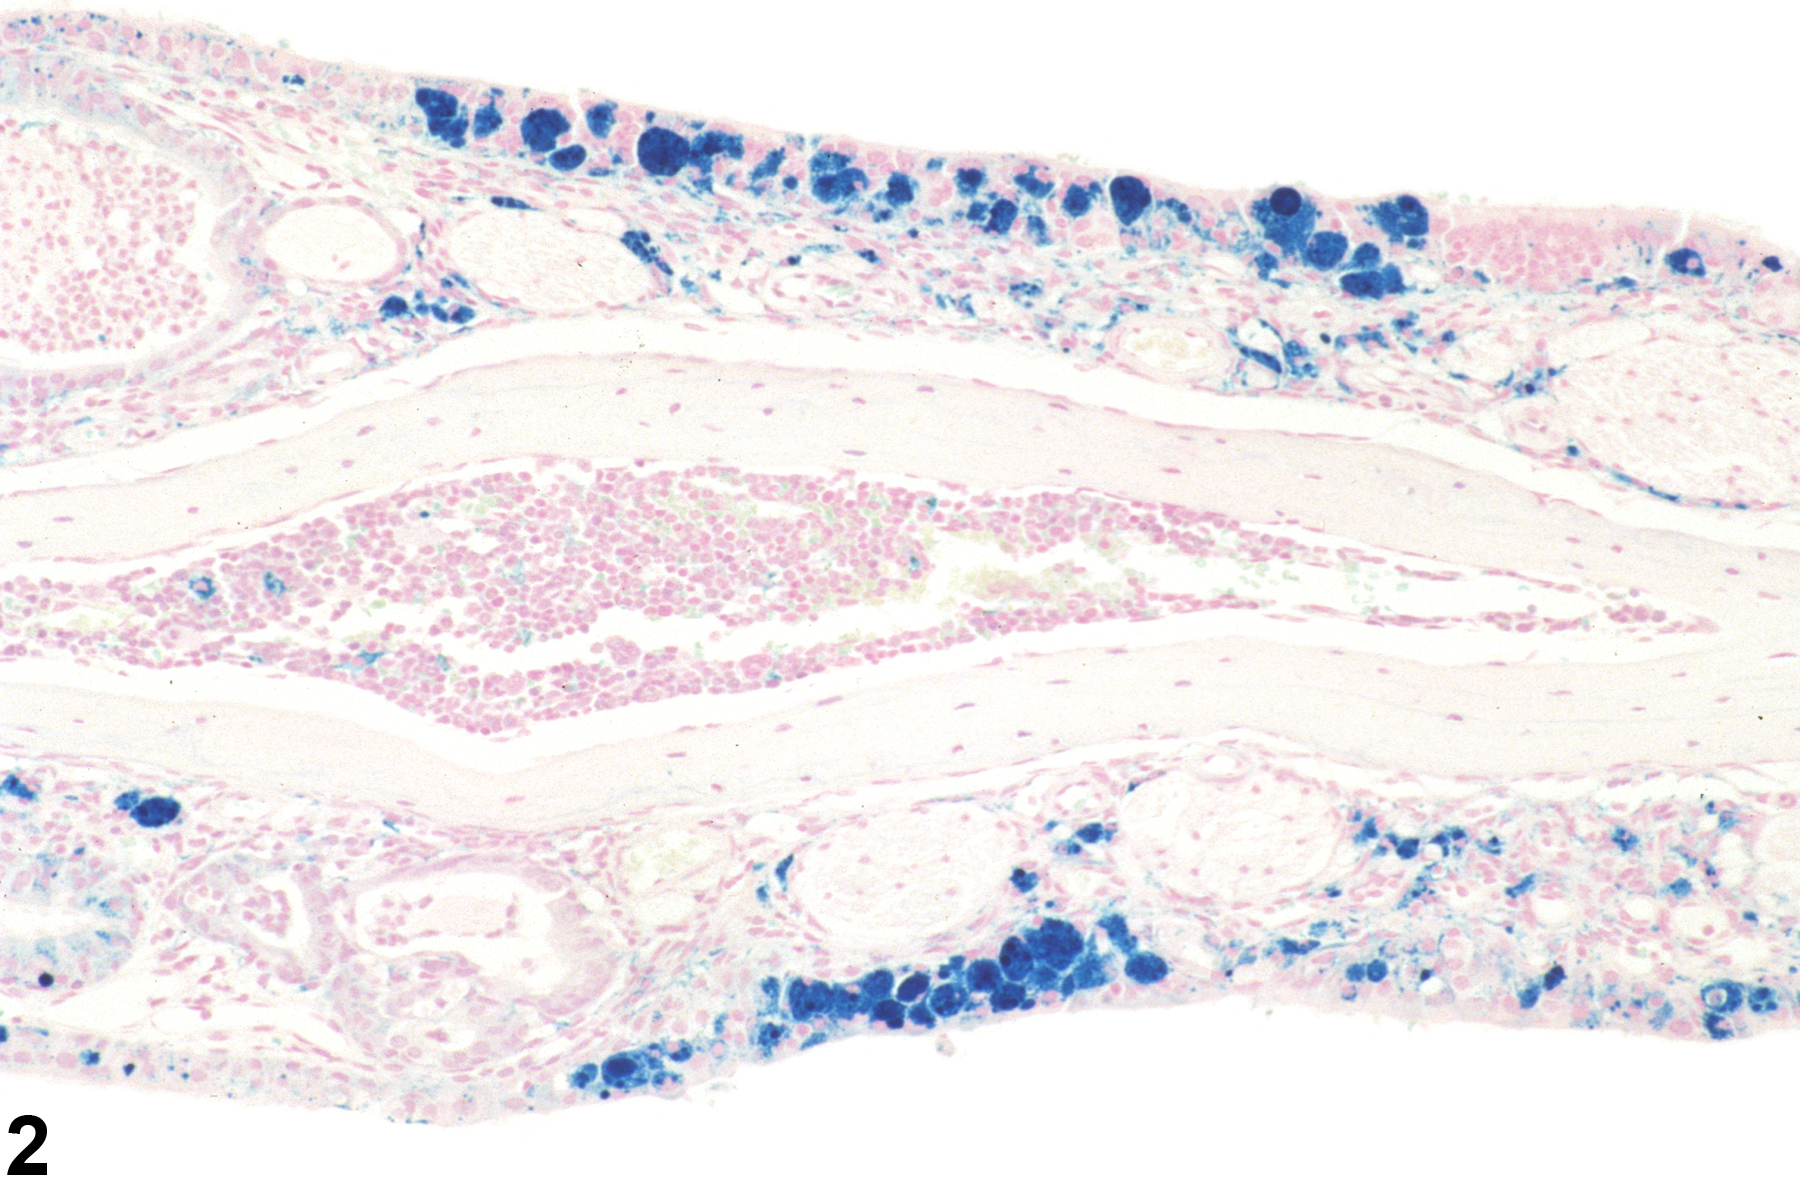 Image of pigment in the nose, respiratory epithelium from a female B6C3F1/N mouse in a subchronic study